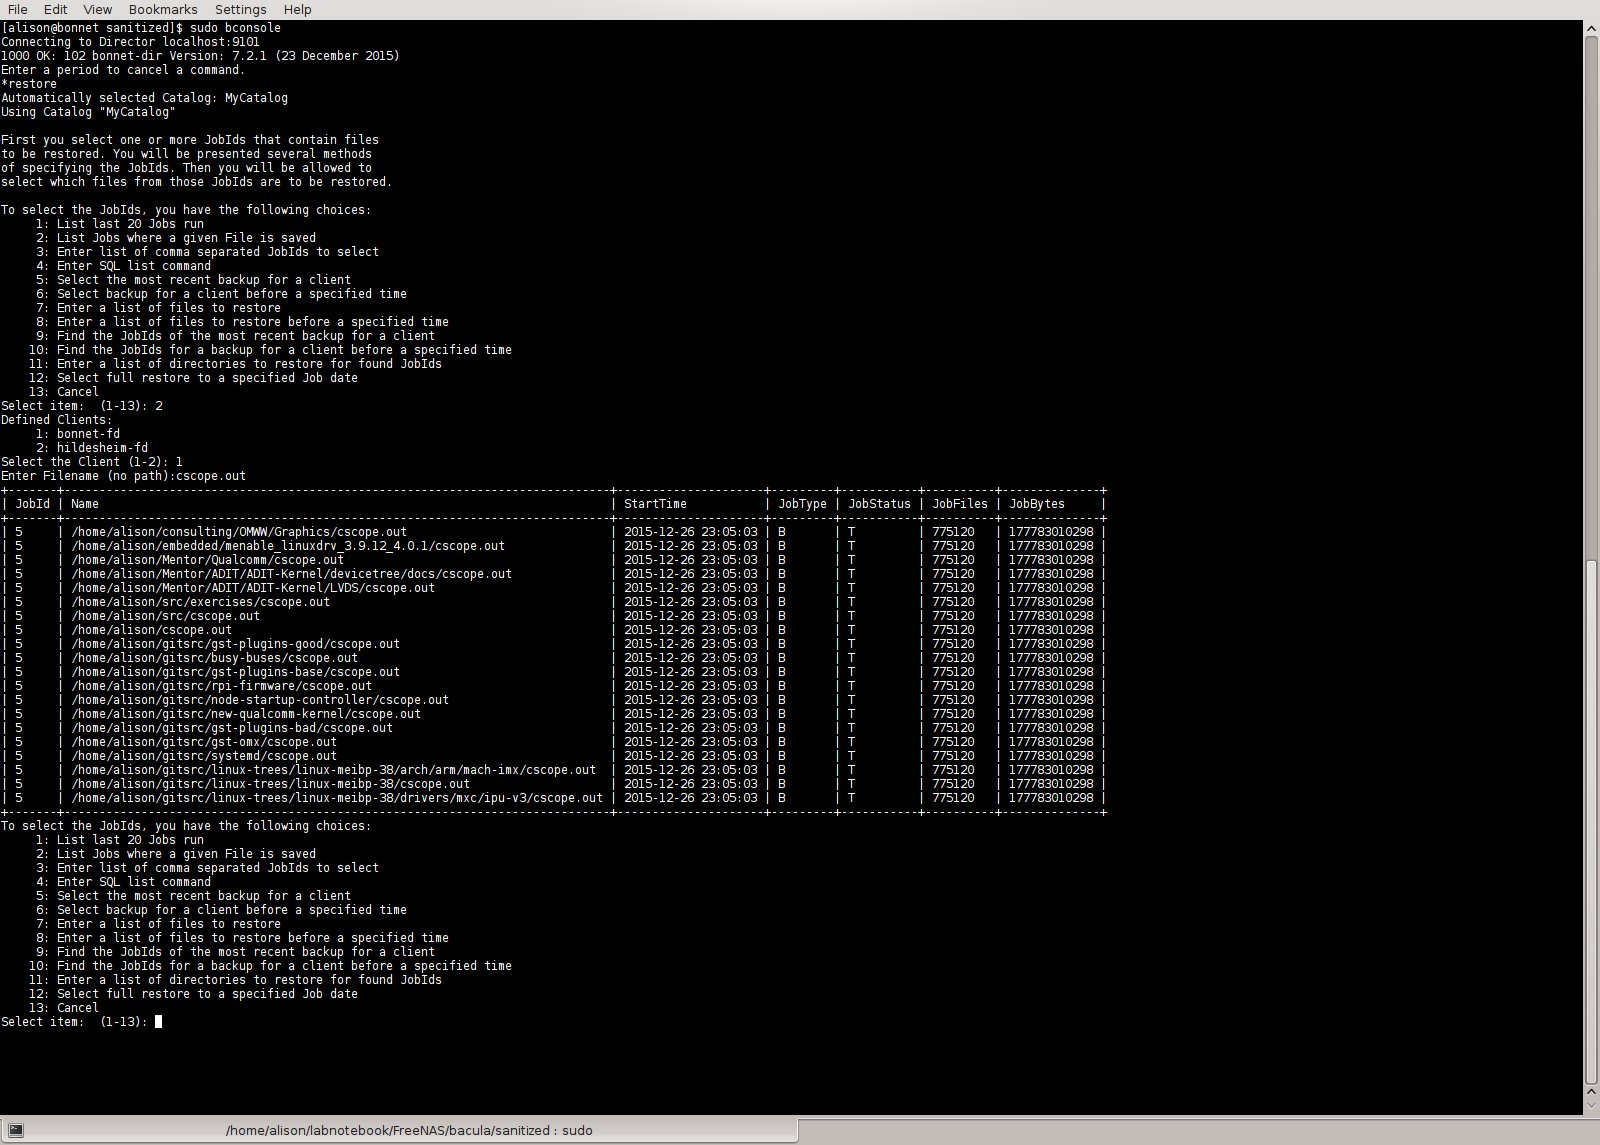 screenshot of restore
command processing in Bacula's bconsole interface